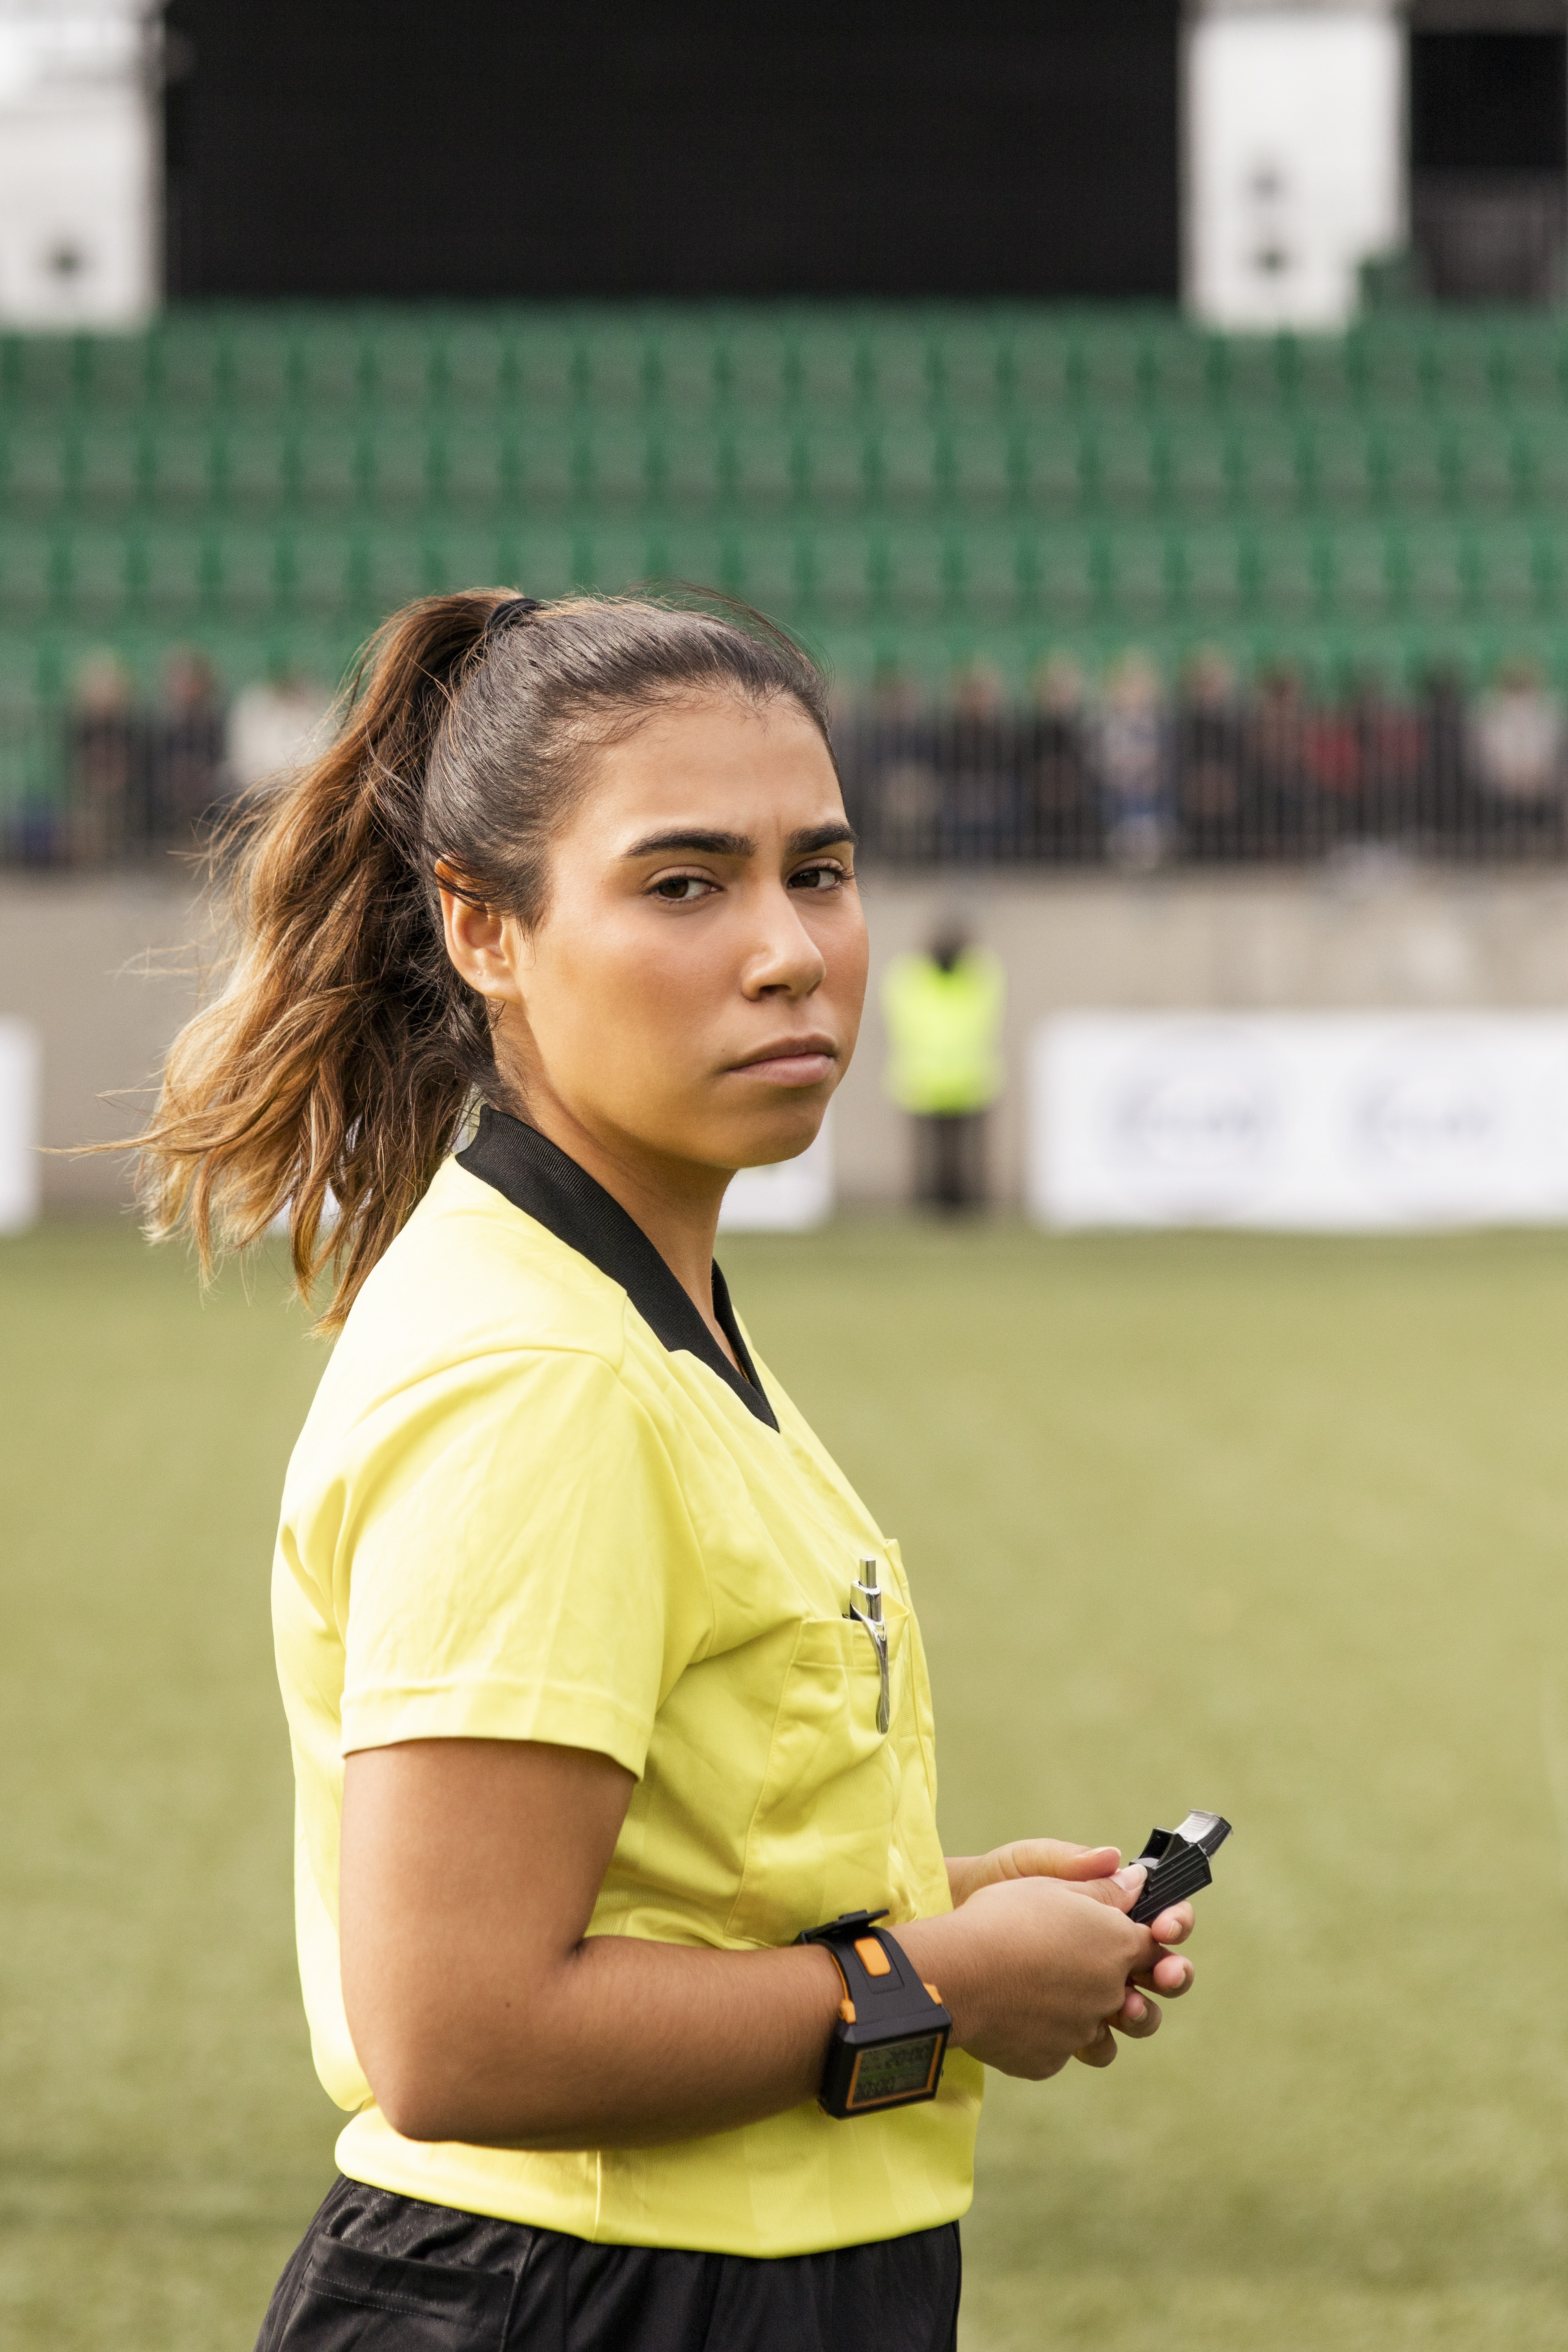 woman refereeing a soccer game